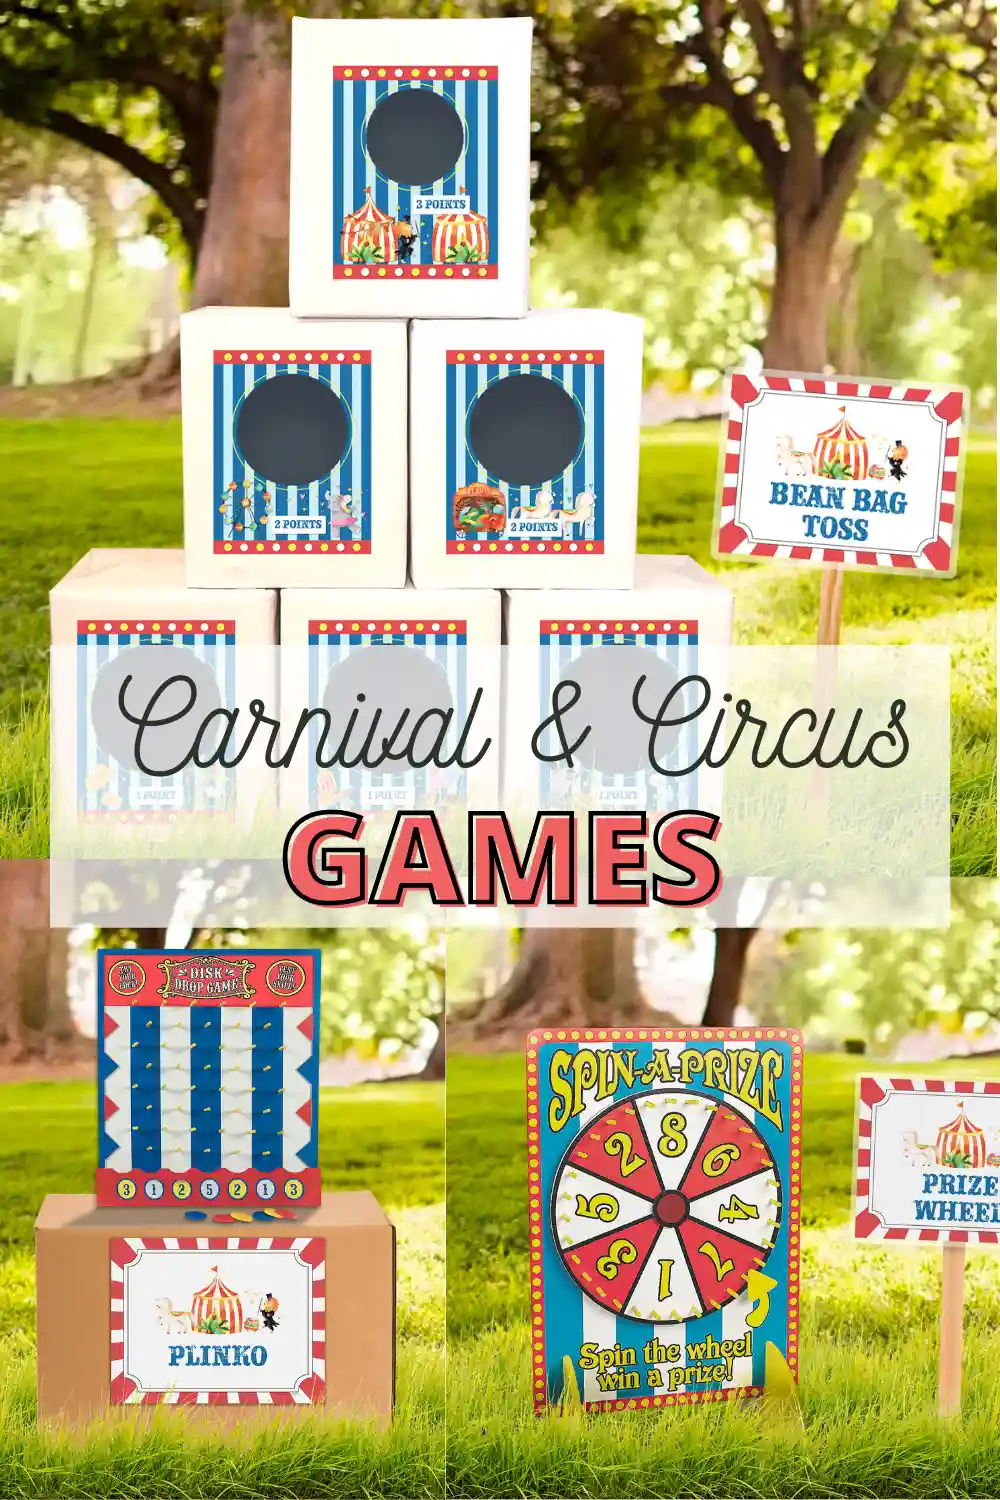 Easy and cheap carnival pary games and circus party themed games and ideas. DIY games for a school carnival, church carnival or fall festival, birthday party celebrations and more.